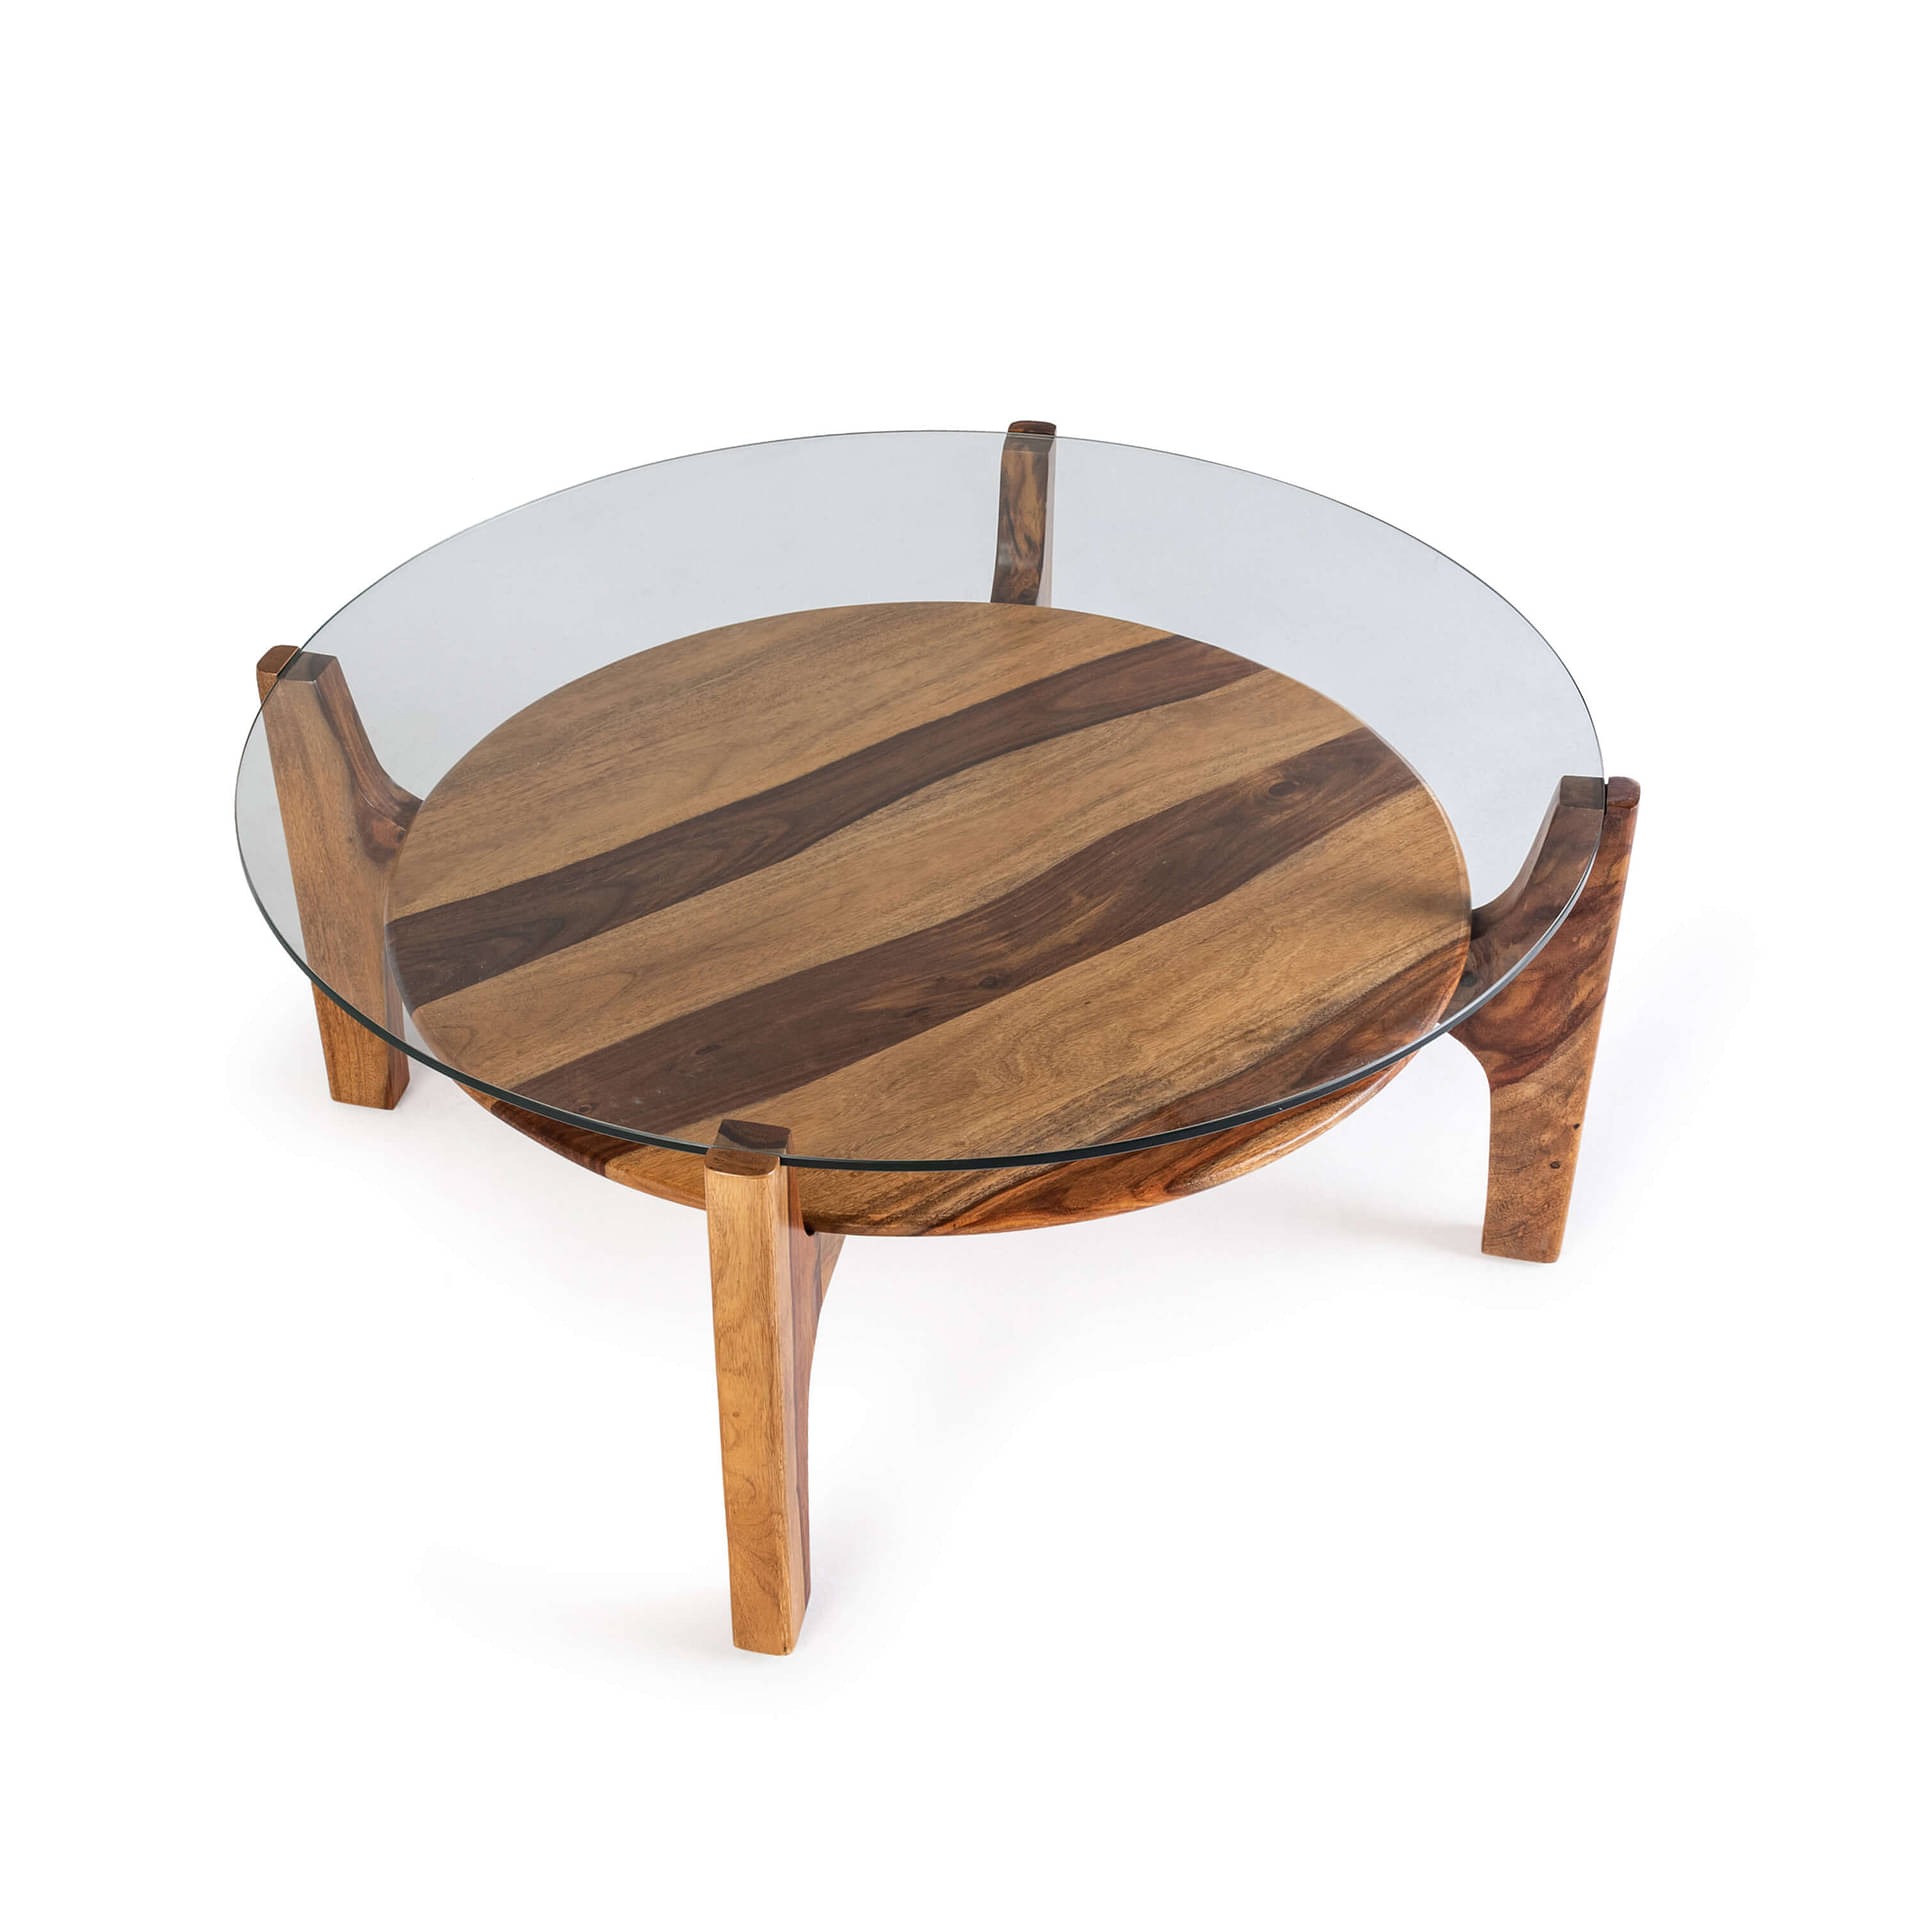 werfo Catering Sheesham Wood Coffee Table - 37.79 inches X 15.7 inches